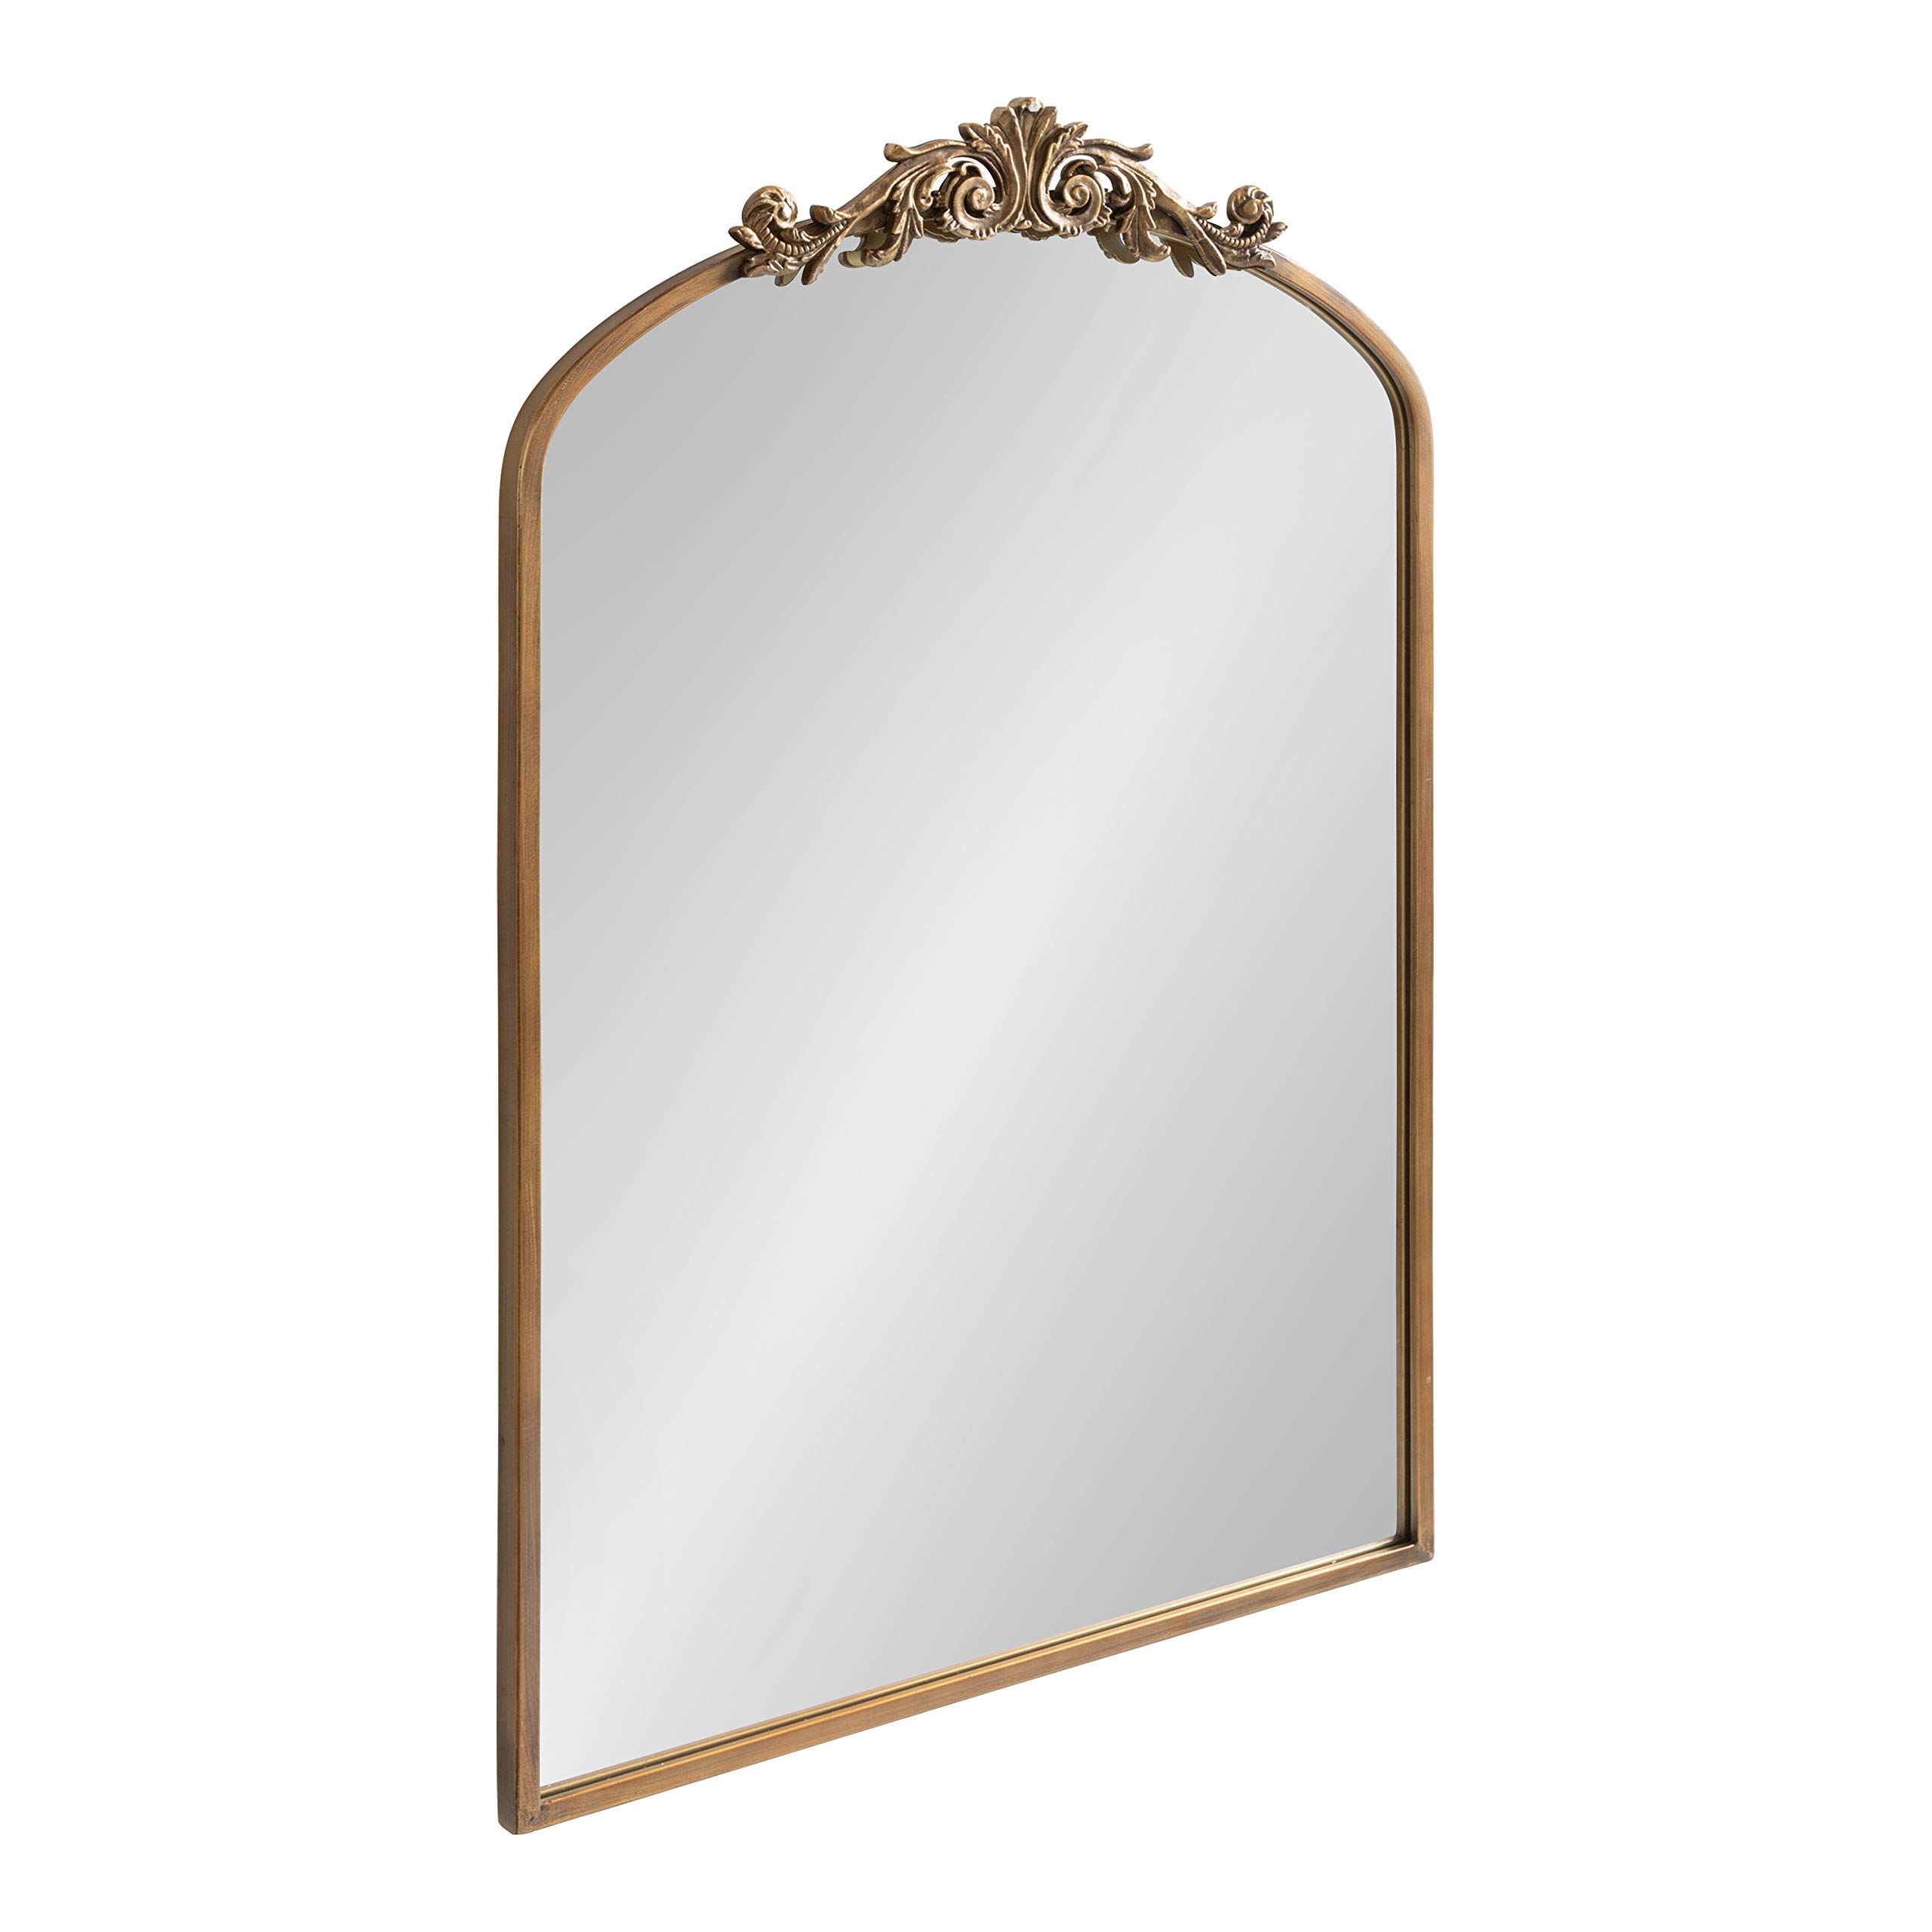 Kate and Laurel Arendahl Traditional Arch Mirror, 24 x 36, Antique Gold, Baroque Inspired Wall De... | Amazon (US)